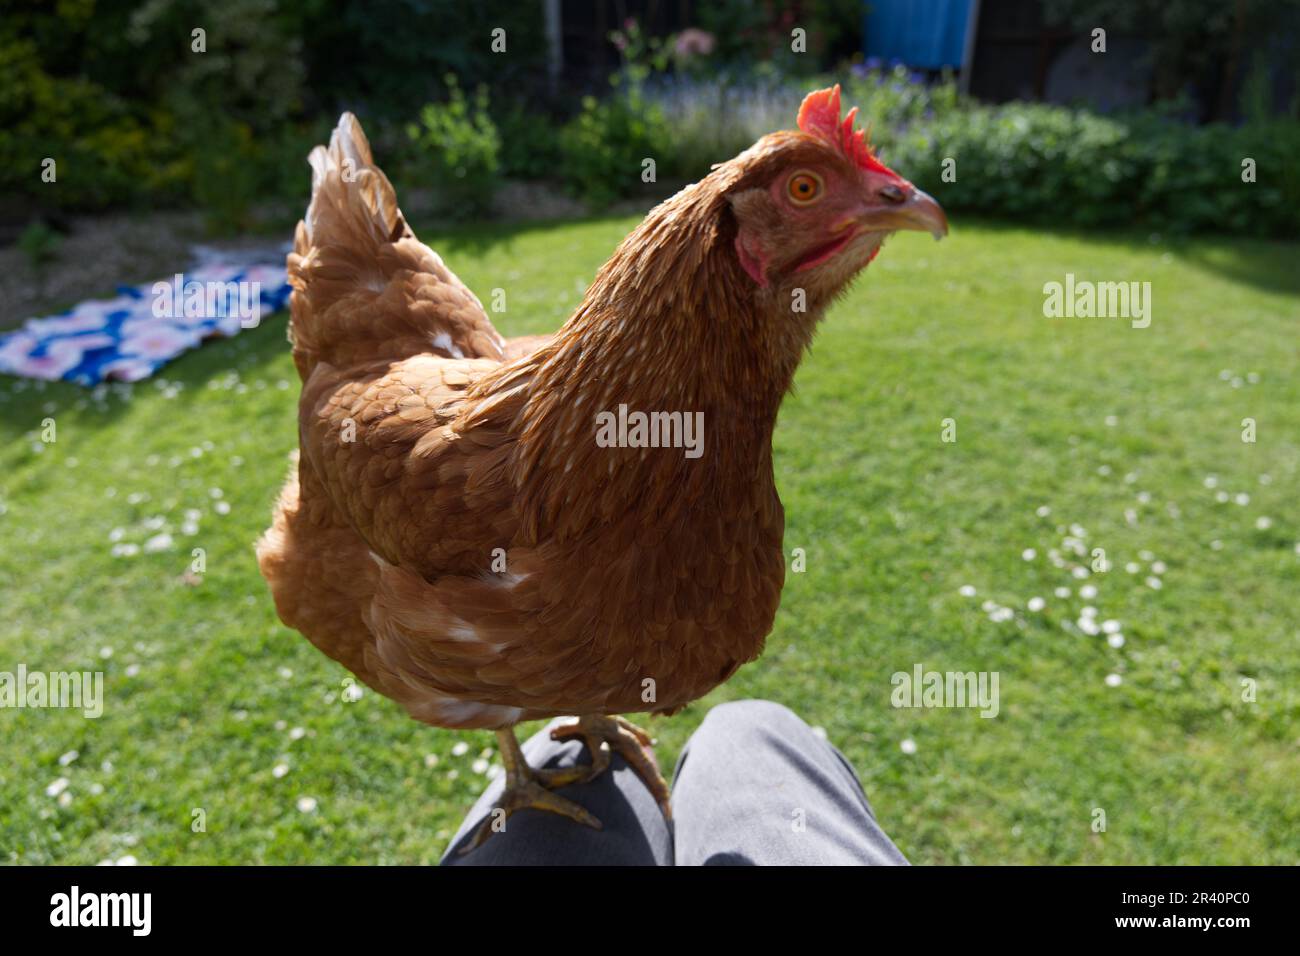 Pet chicken perched on the knee of a person Stock Photo